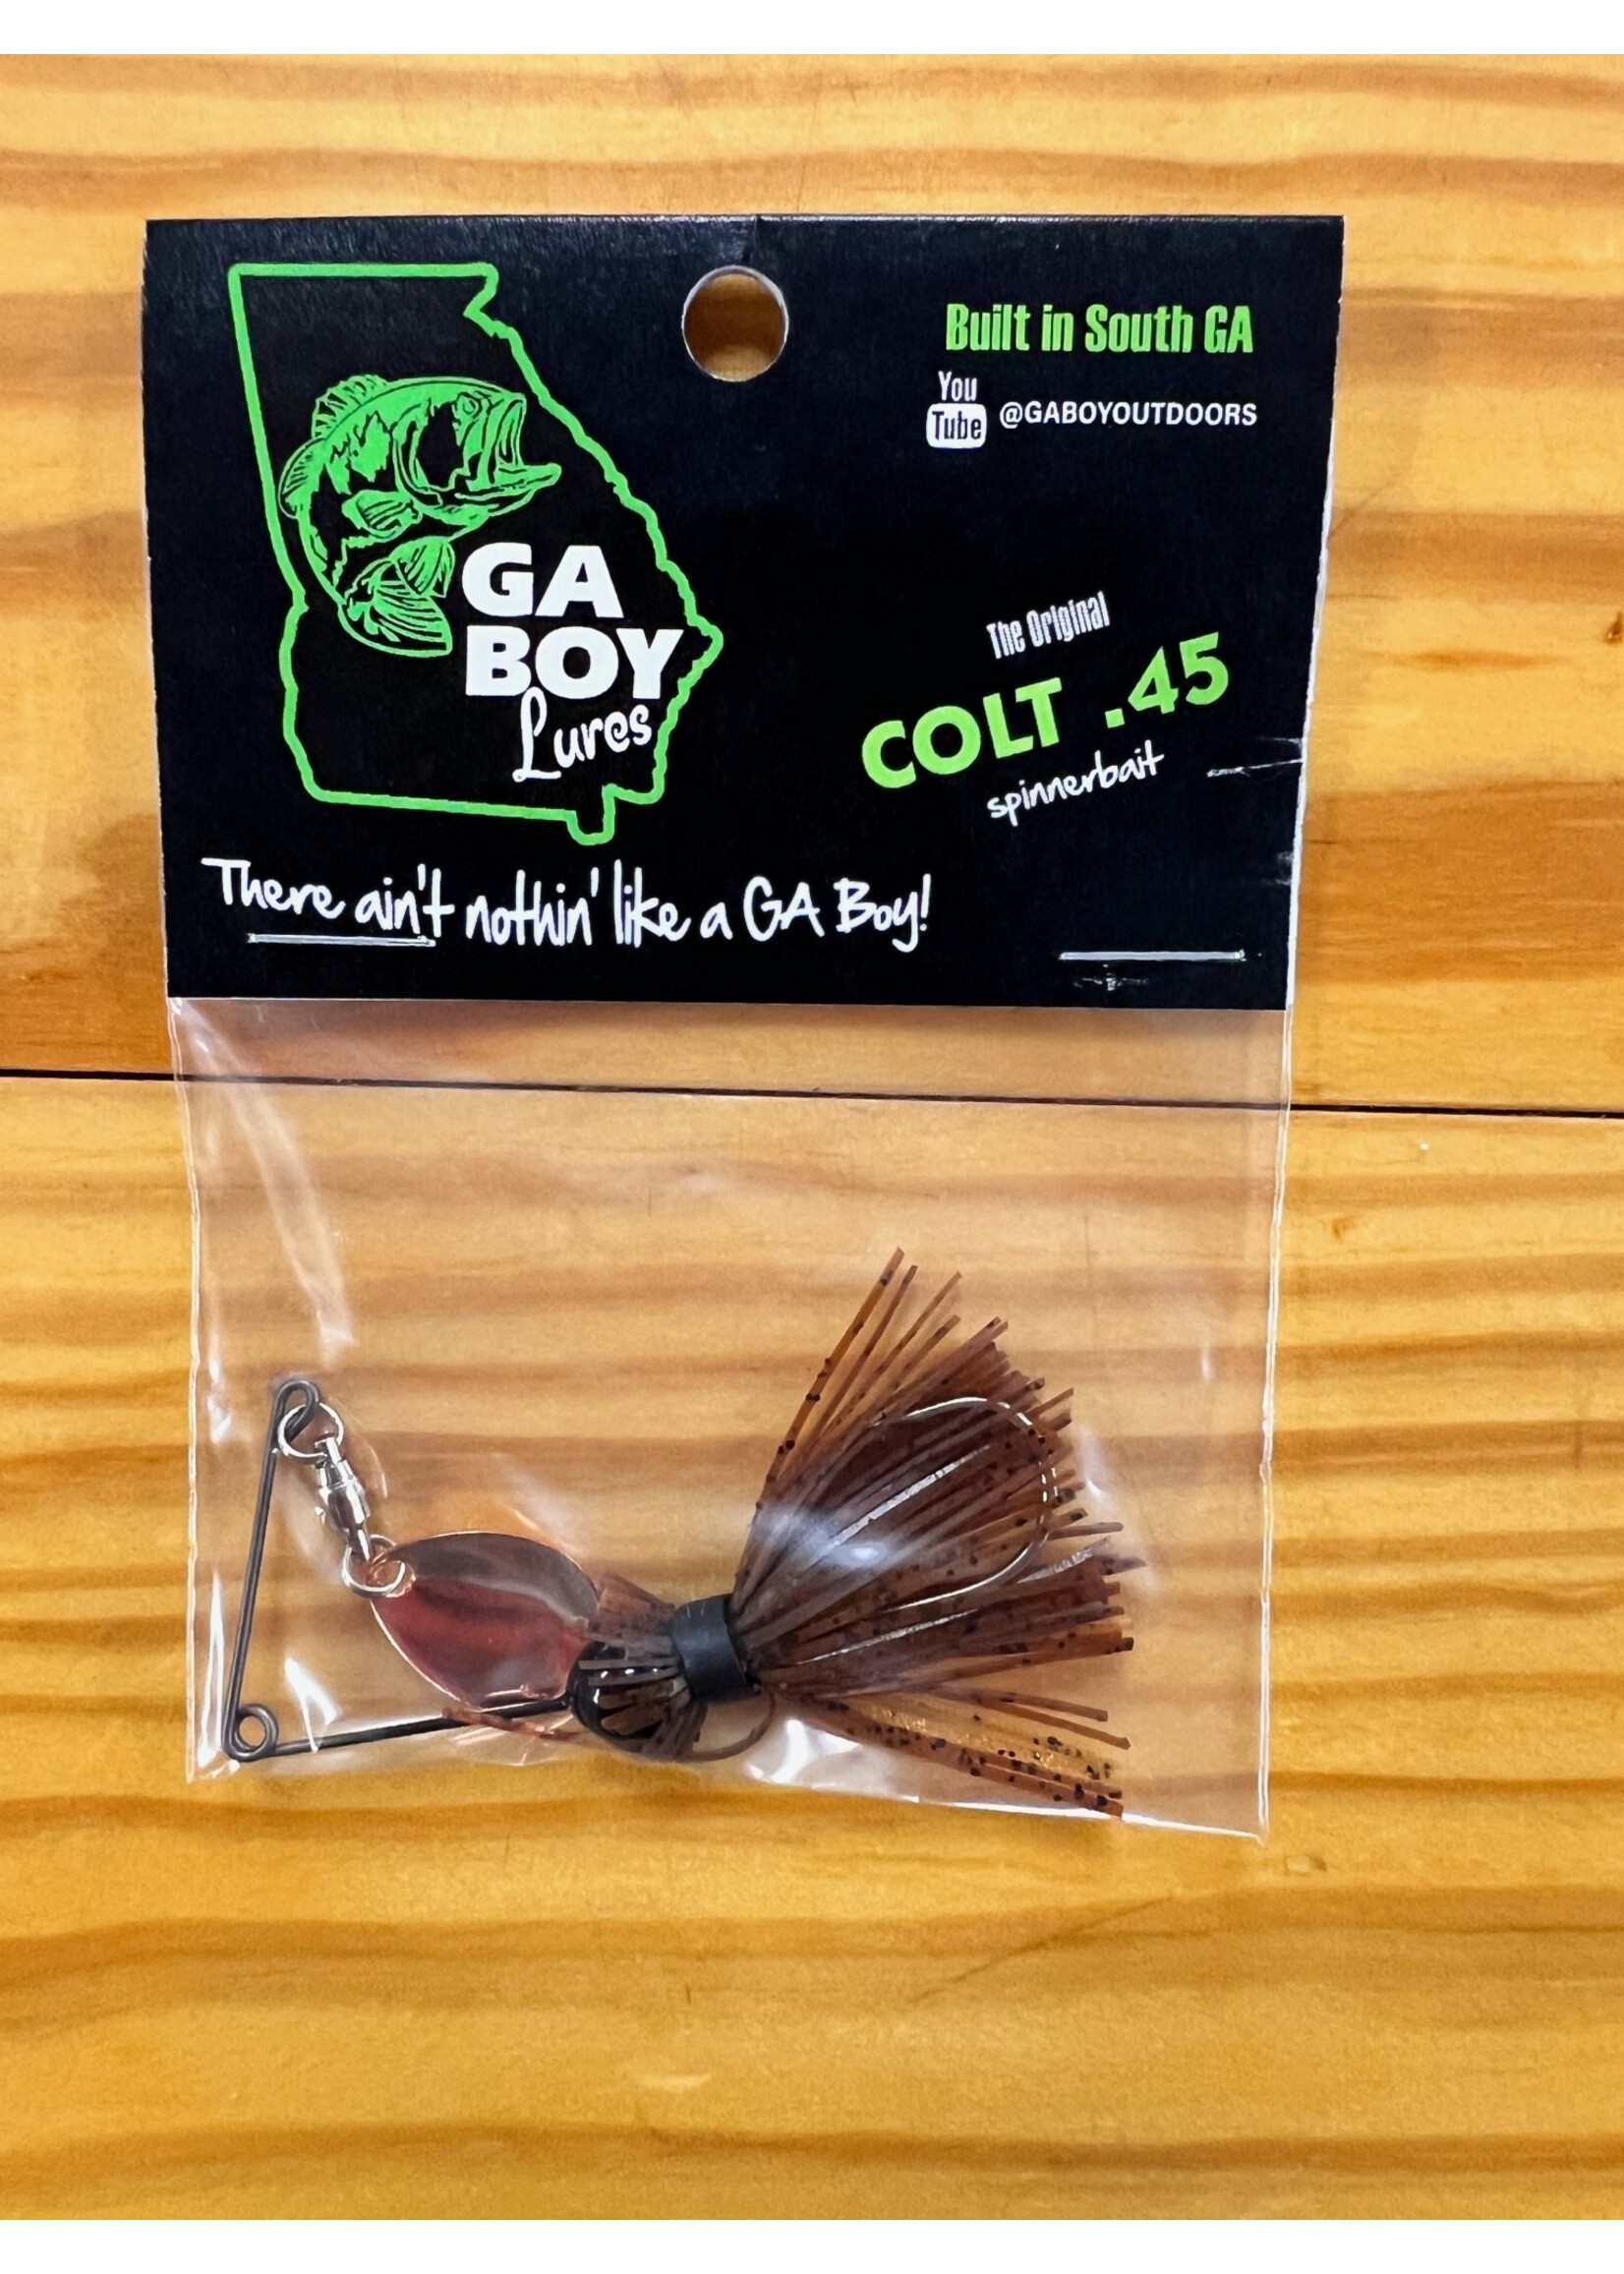 COLT .45 SPINNERBAITS - Rugged Shoal Outfitters